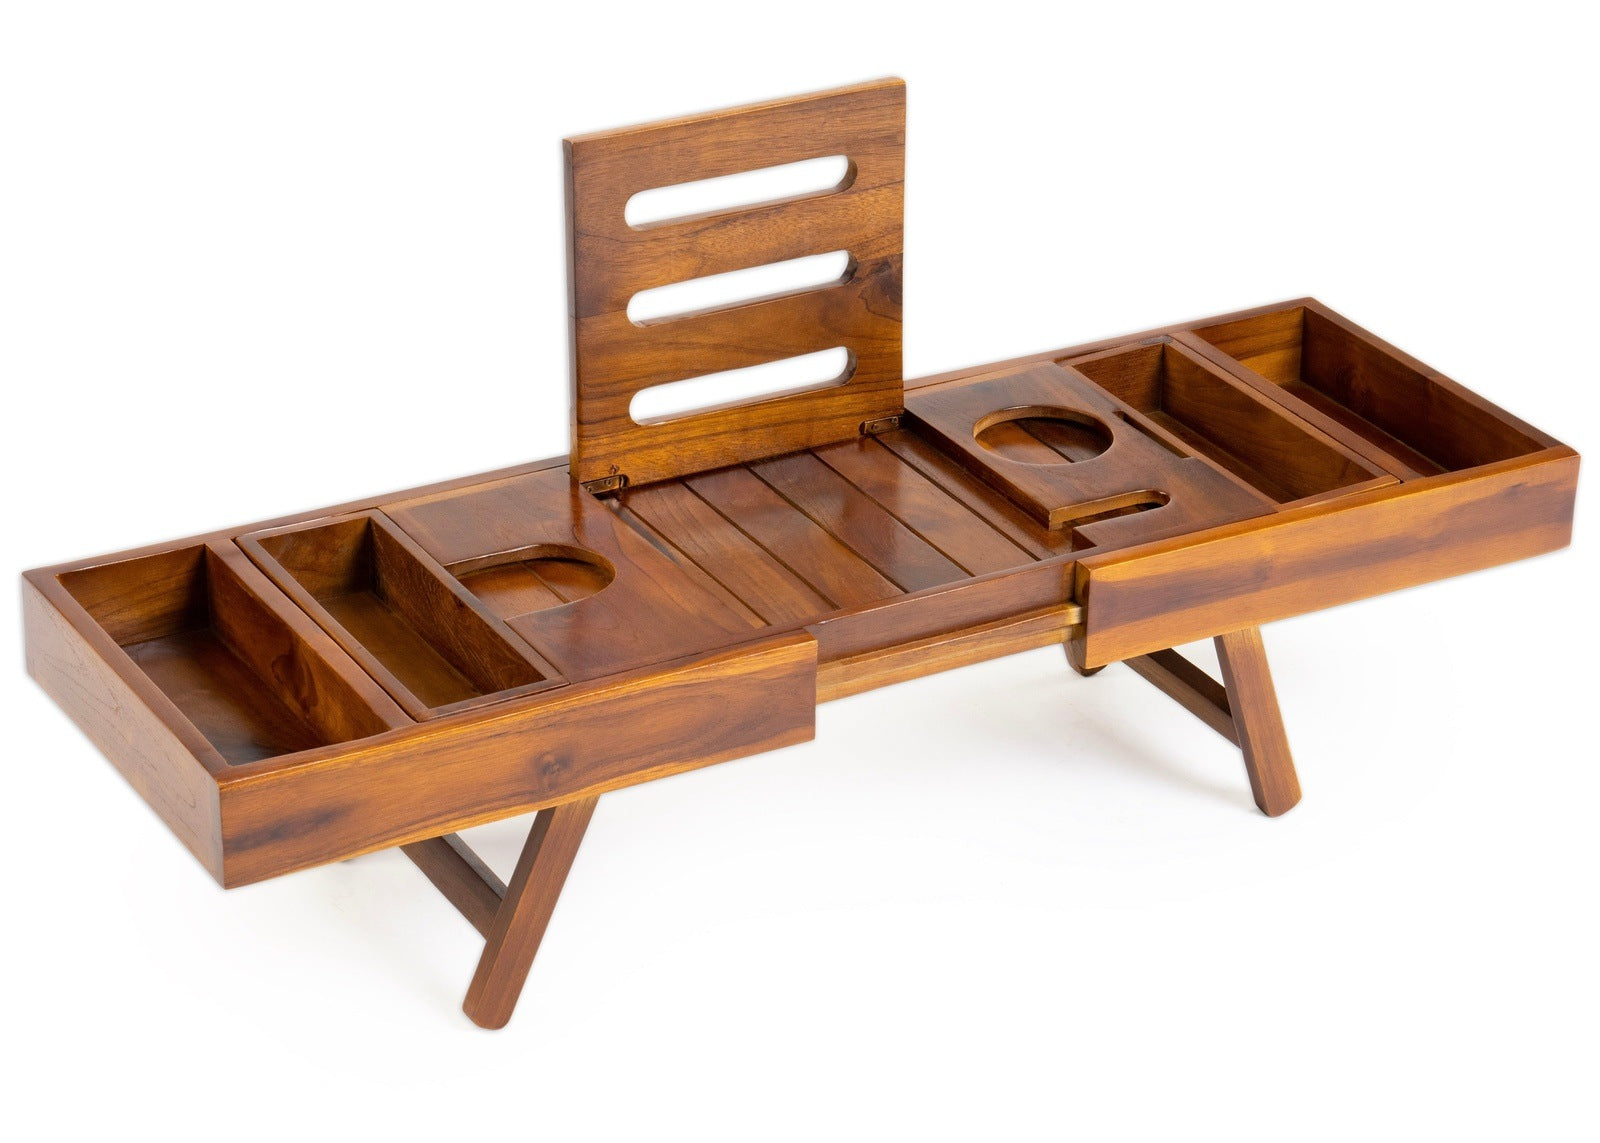 Teak Bathtub Tray, Expandable Wooden Bath Tray for Tub with Wine and Book